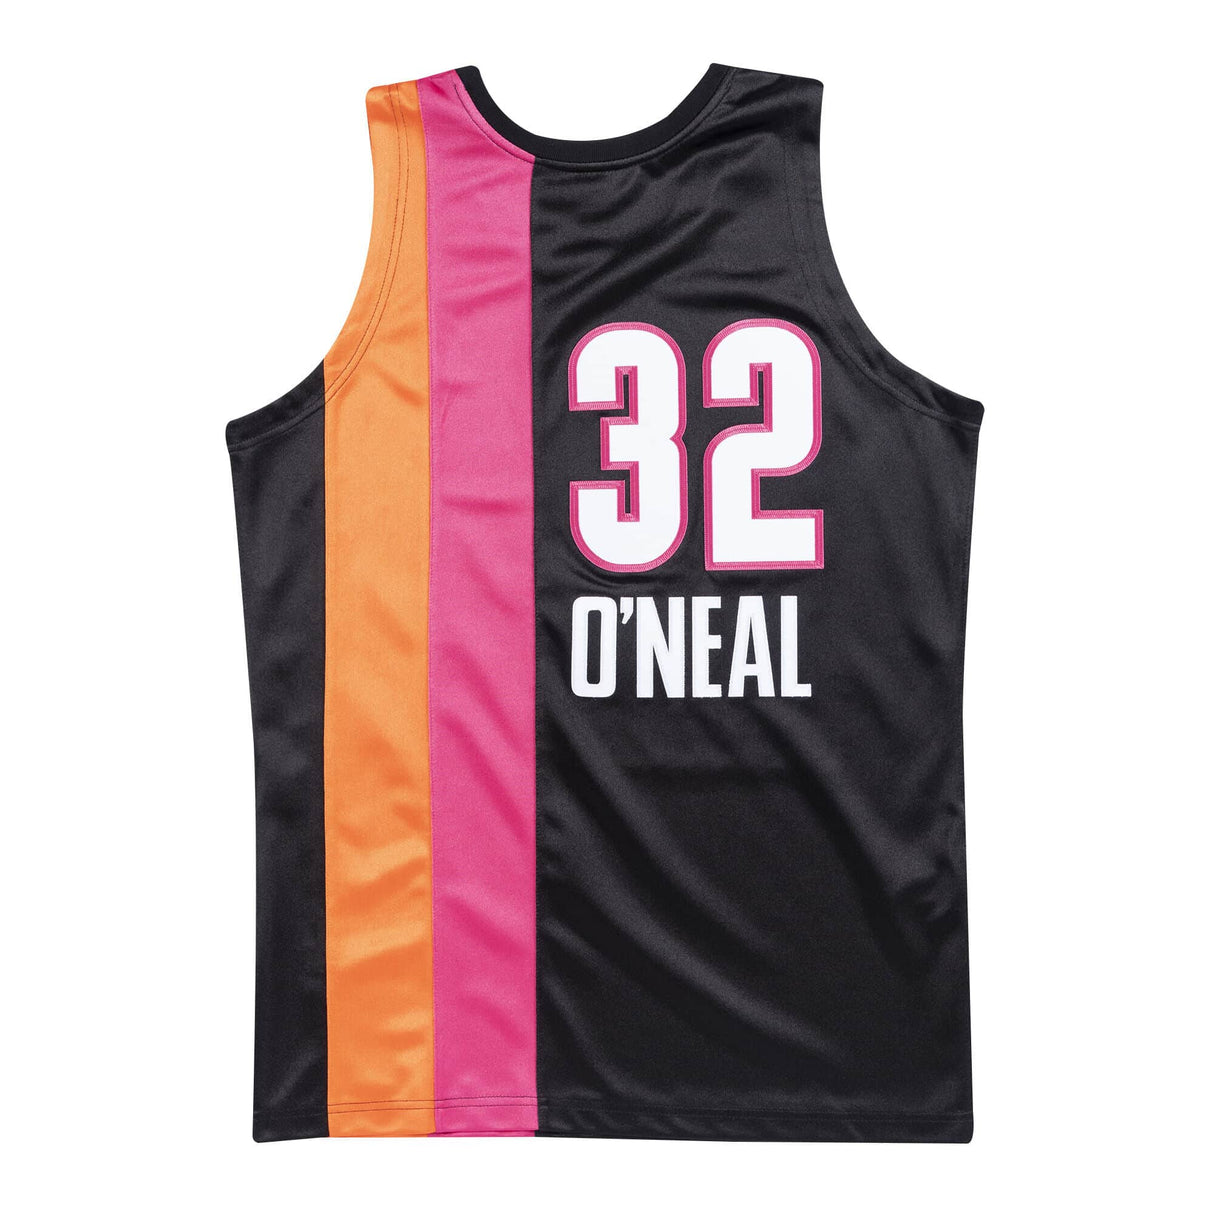 Shaquille O'Neal Miami Heat Jersey - Jersey and Sneakers